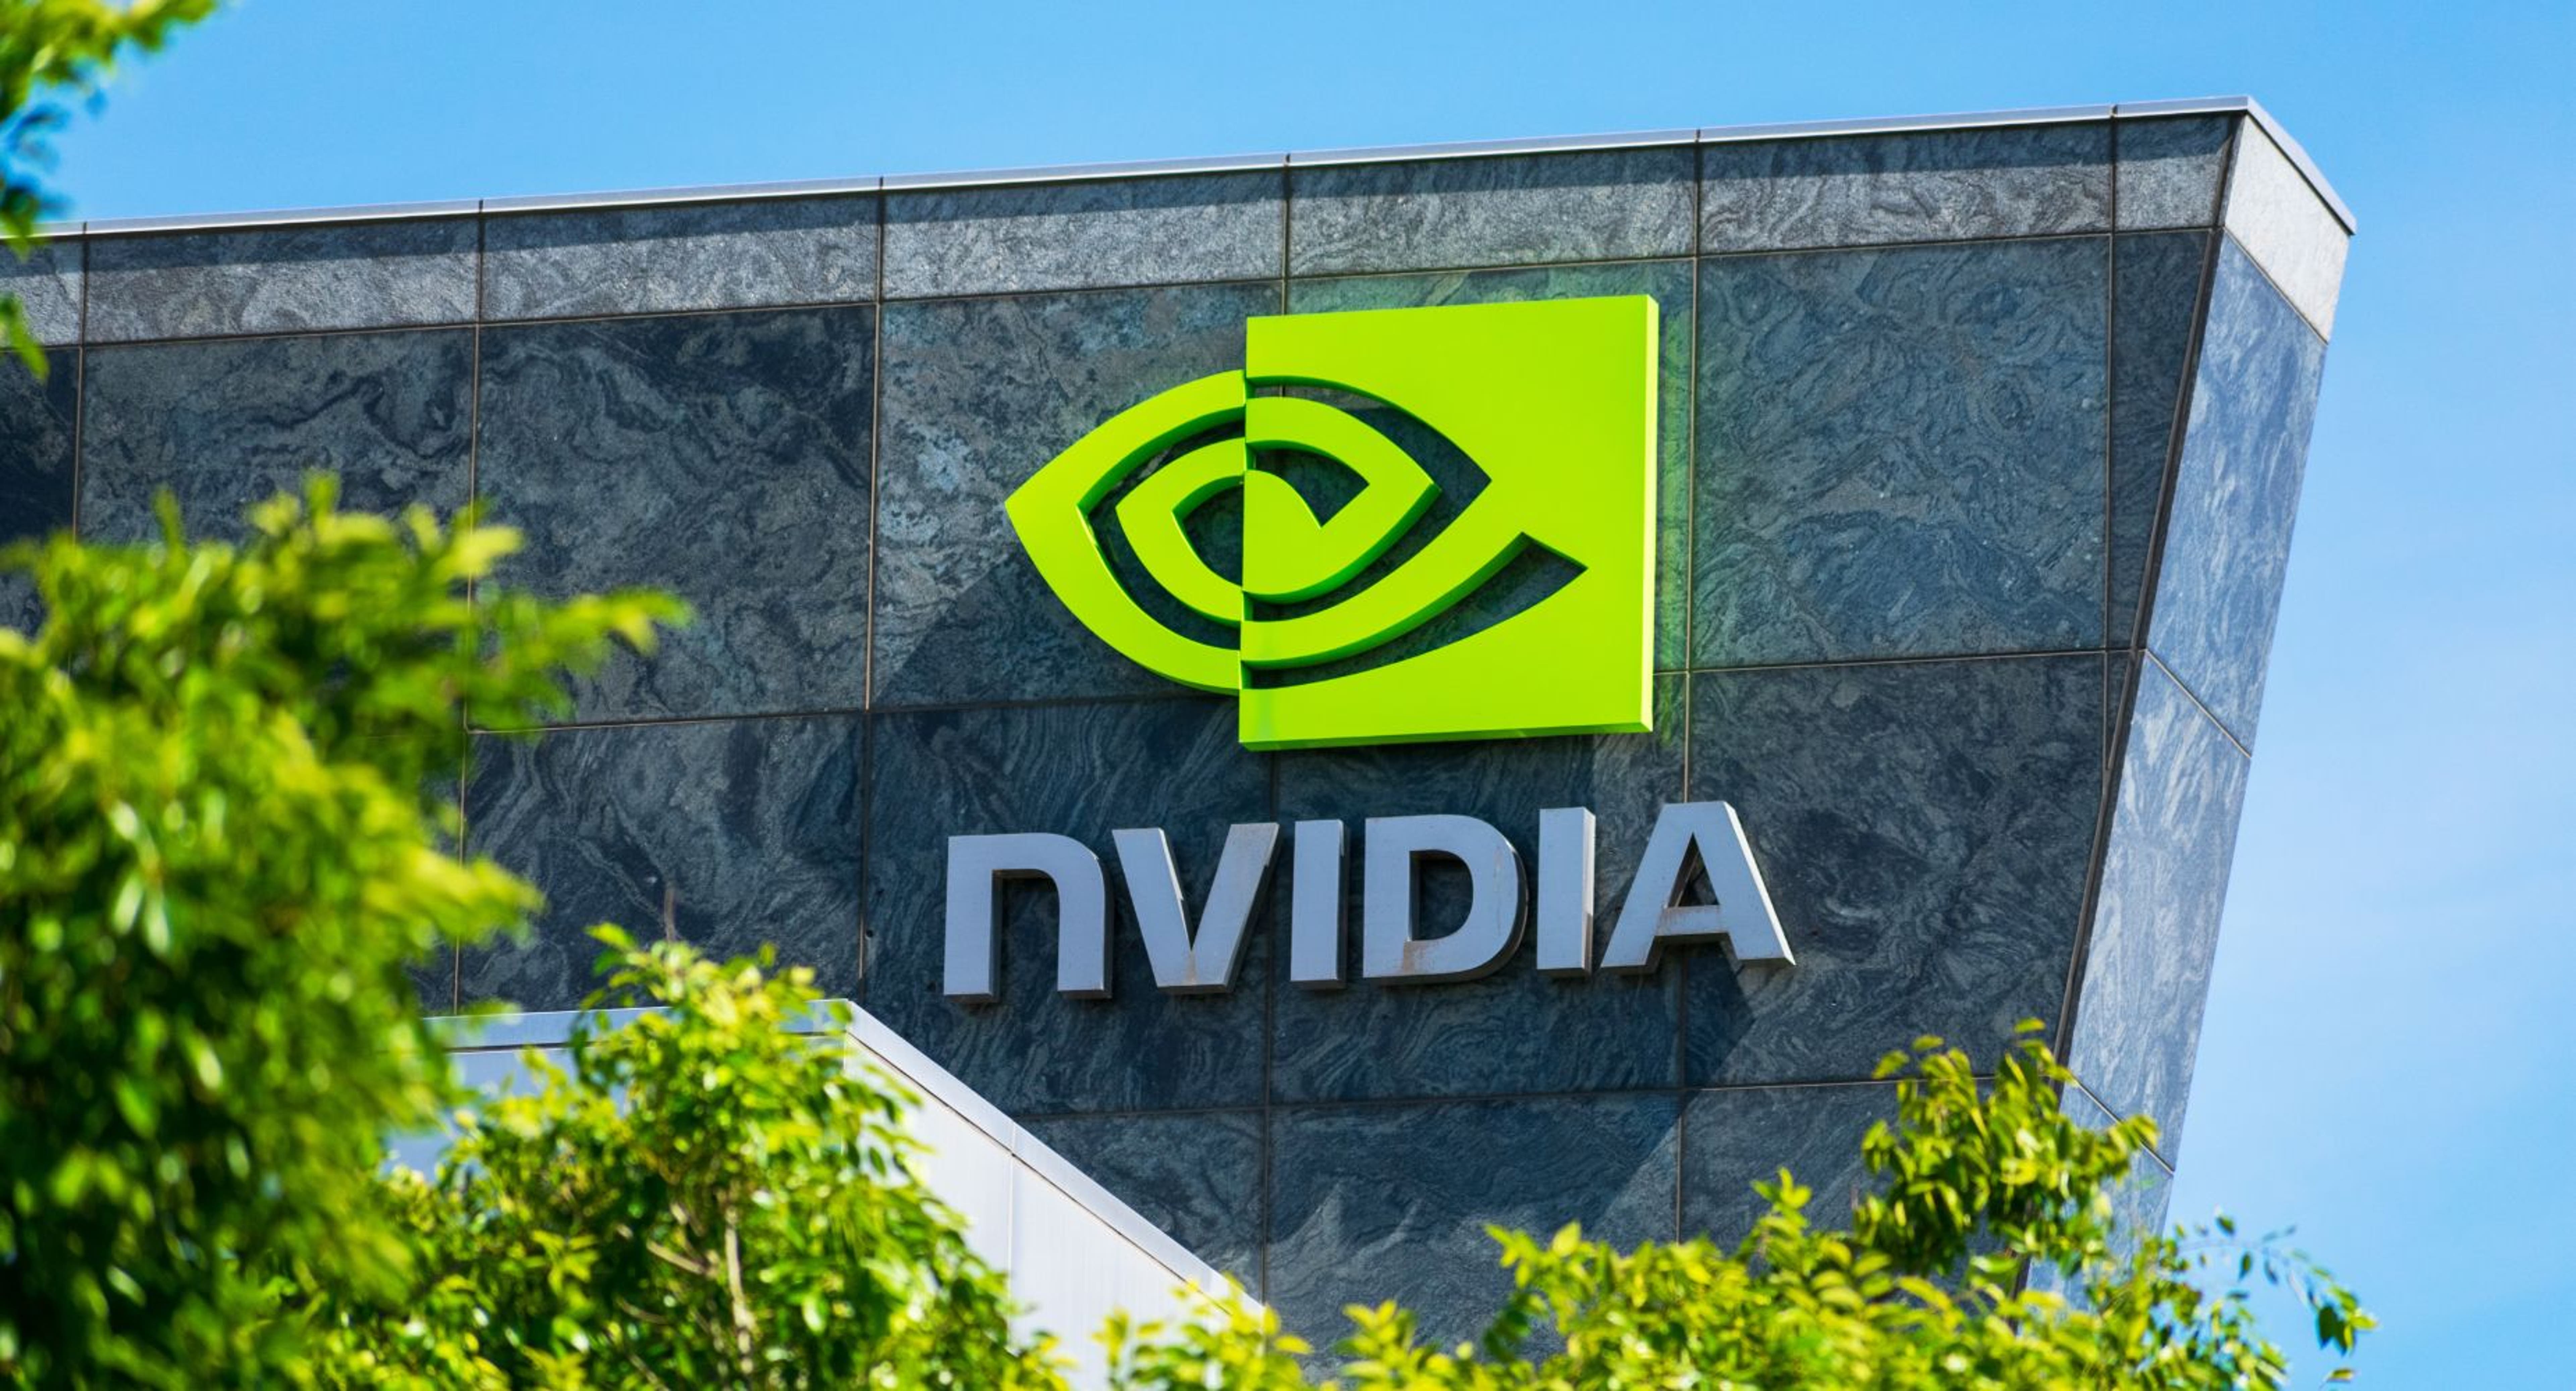 NVIDIA Analysts Praise Company Hitting The &#39;Mother of All Cycles&#39;: &#39;To $1 Trillion And Beyond For The AI Leader&#39;